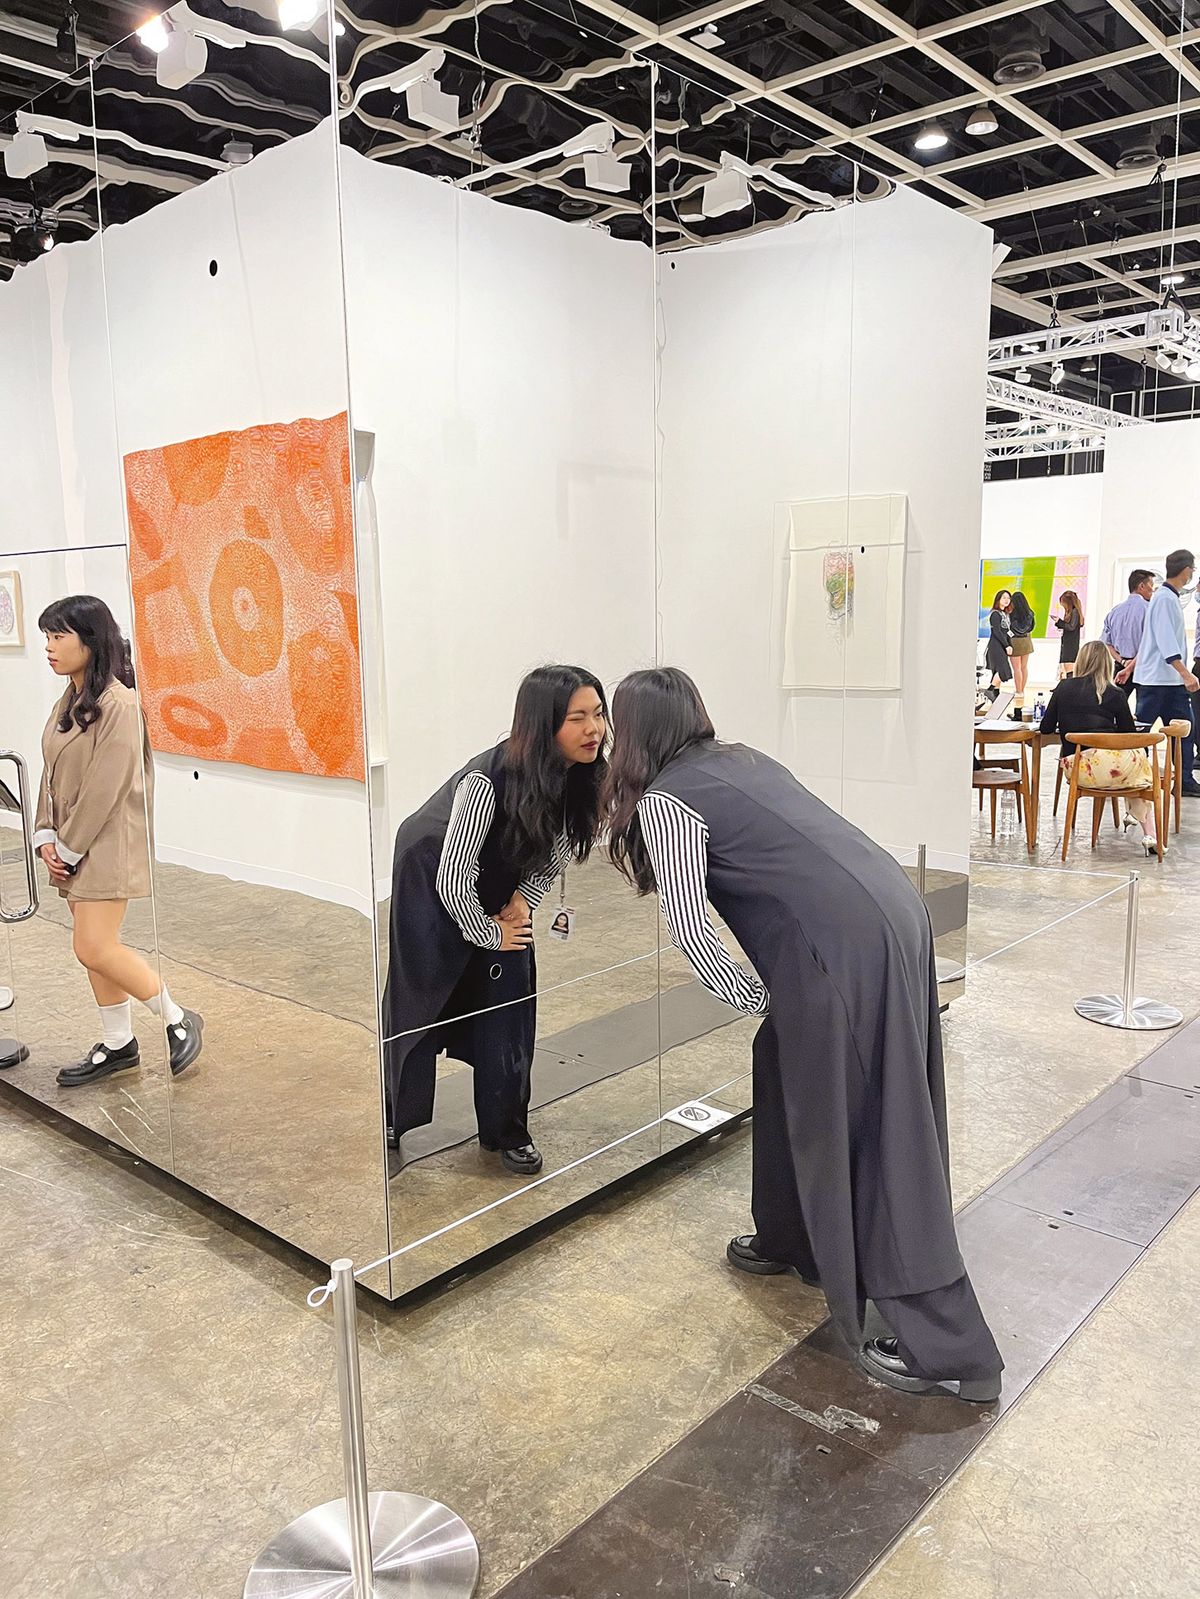 London’s Victoria Miro gallery sold three Yayoi Kusama works, including an Infinity Mirror Room (Where the Lights in My Heart Go, 2016), for a total of $11m Photo: The Art Newspaper; courtesy the artist, Ota Fine Arts and Victoria Miro; © Yayoi Kusama